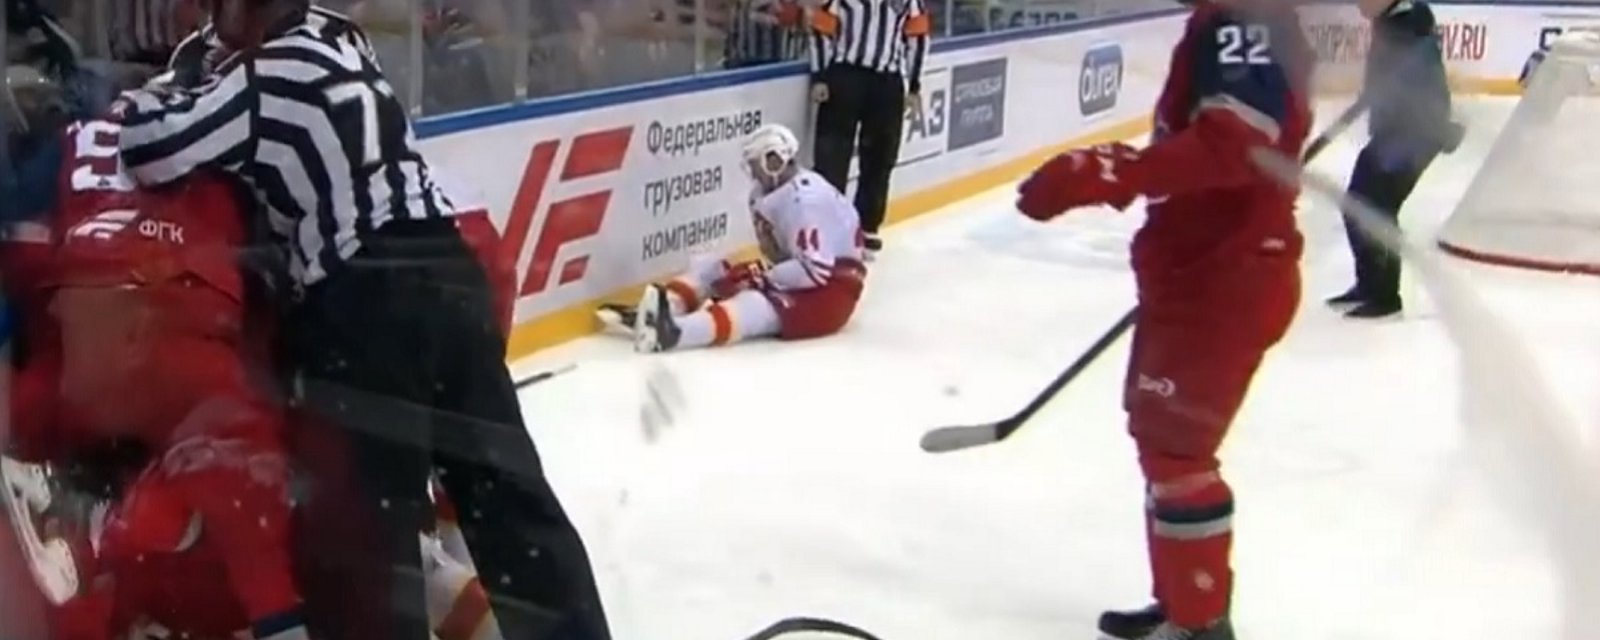 NHL prospect receives 13 game suspension for attacking an official.